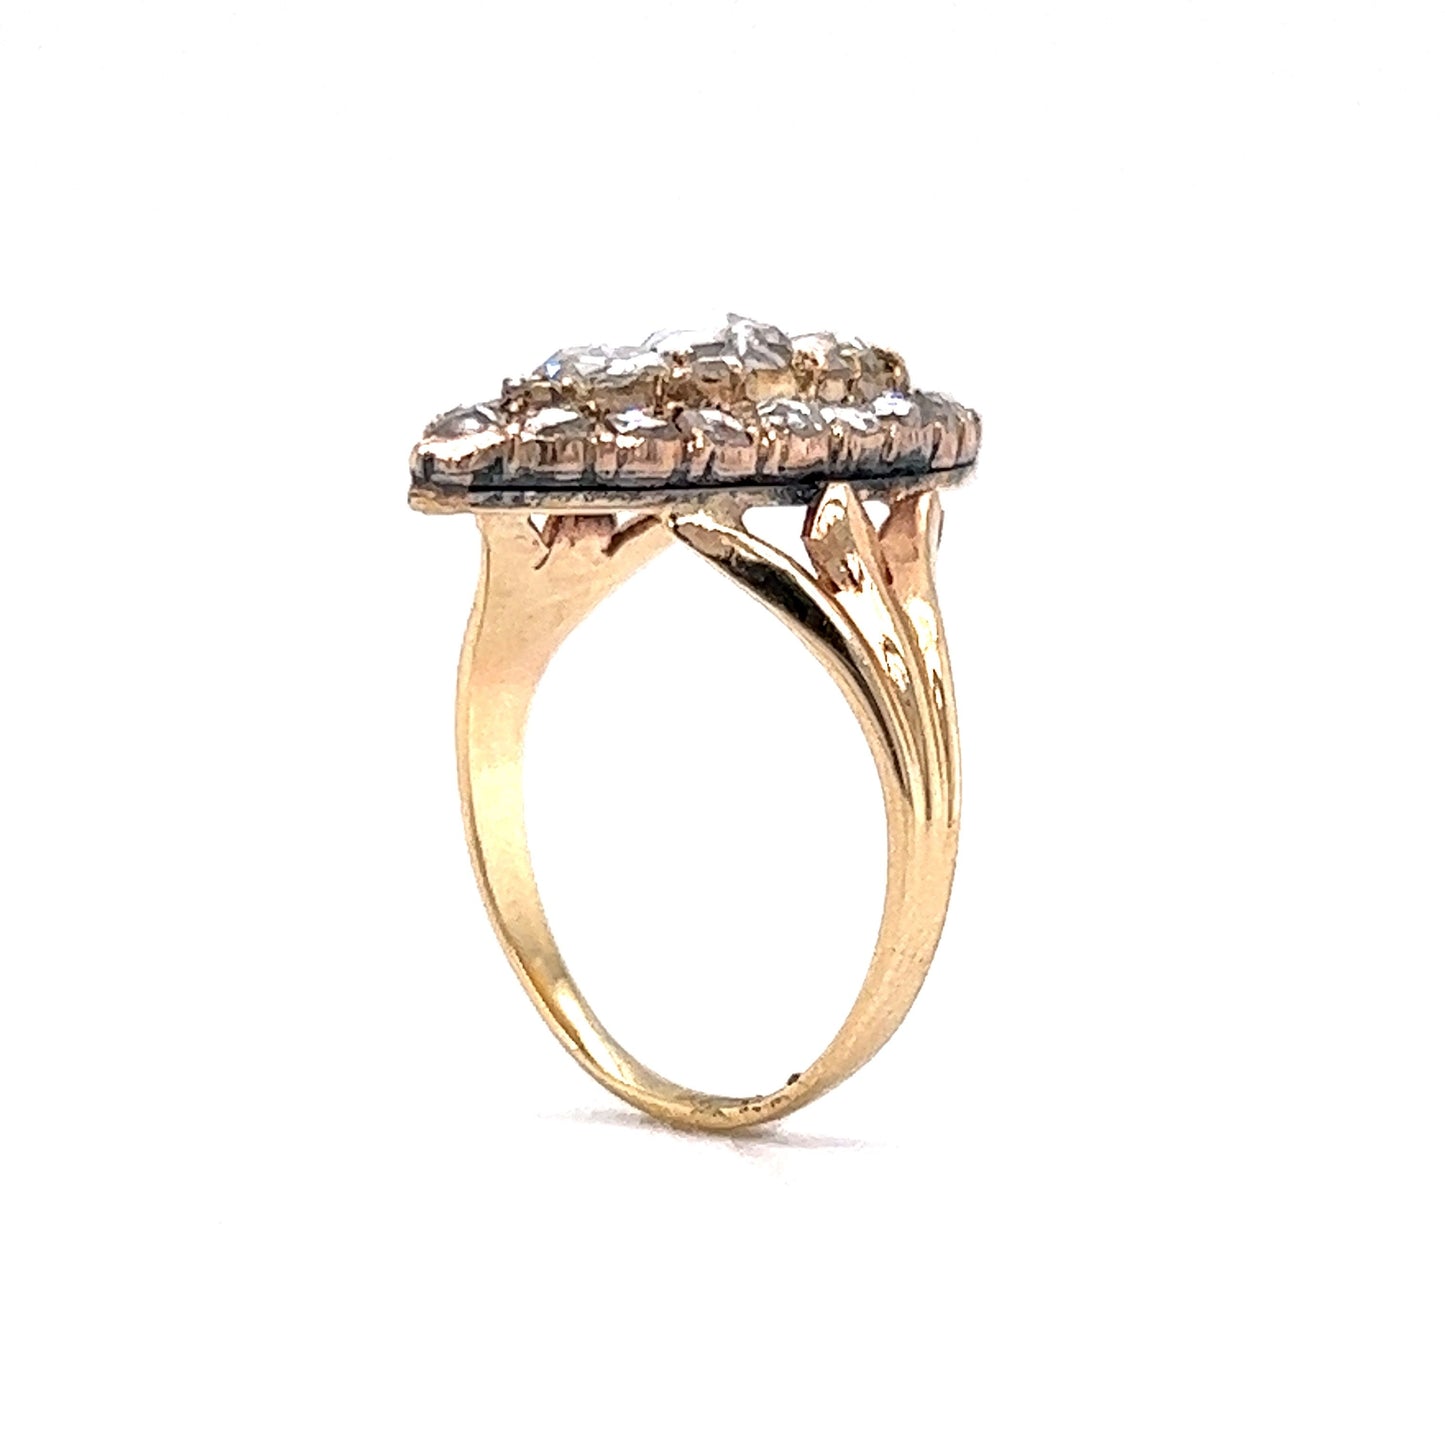 1.10 Victorian Navette Diamond Ring in 10k Yellow Gold